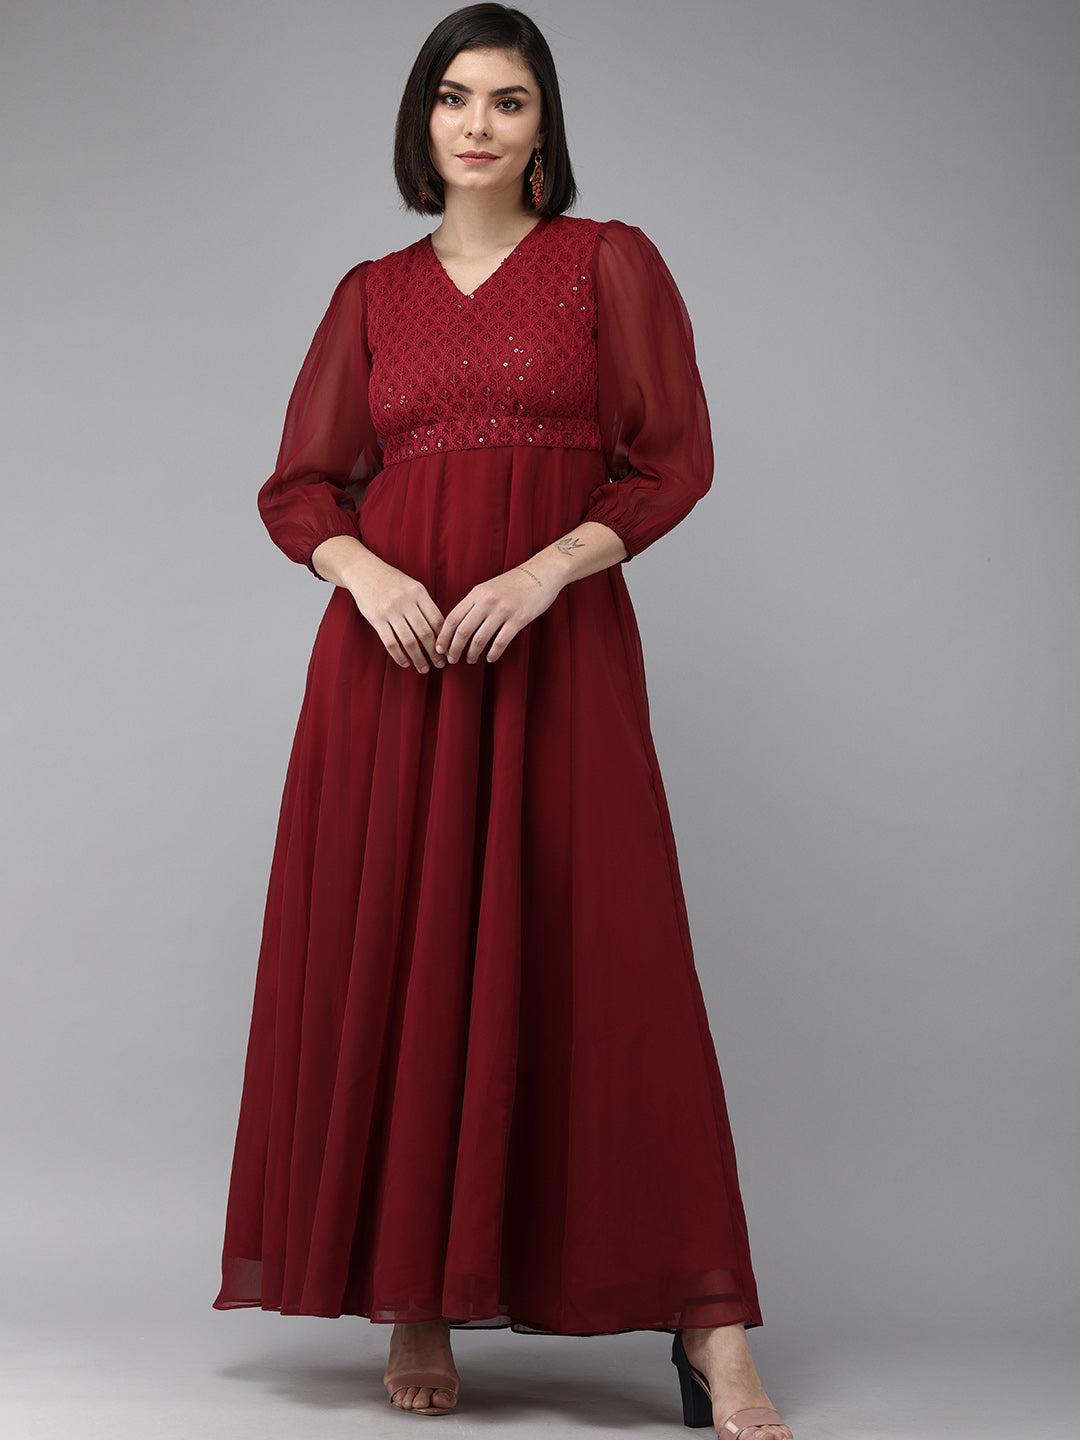 Bhama Couture Maroon Geogette Sequence Embellished Maxi Dress